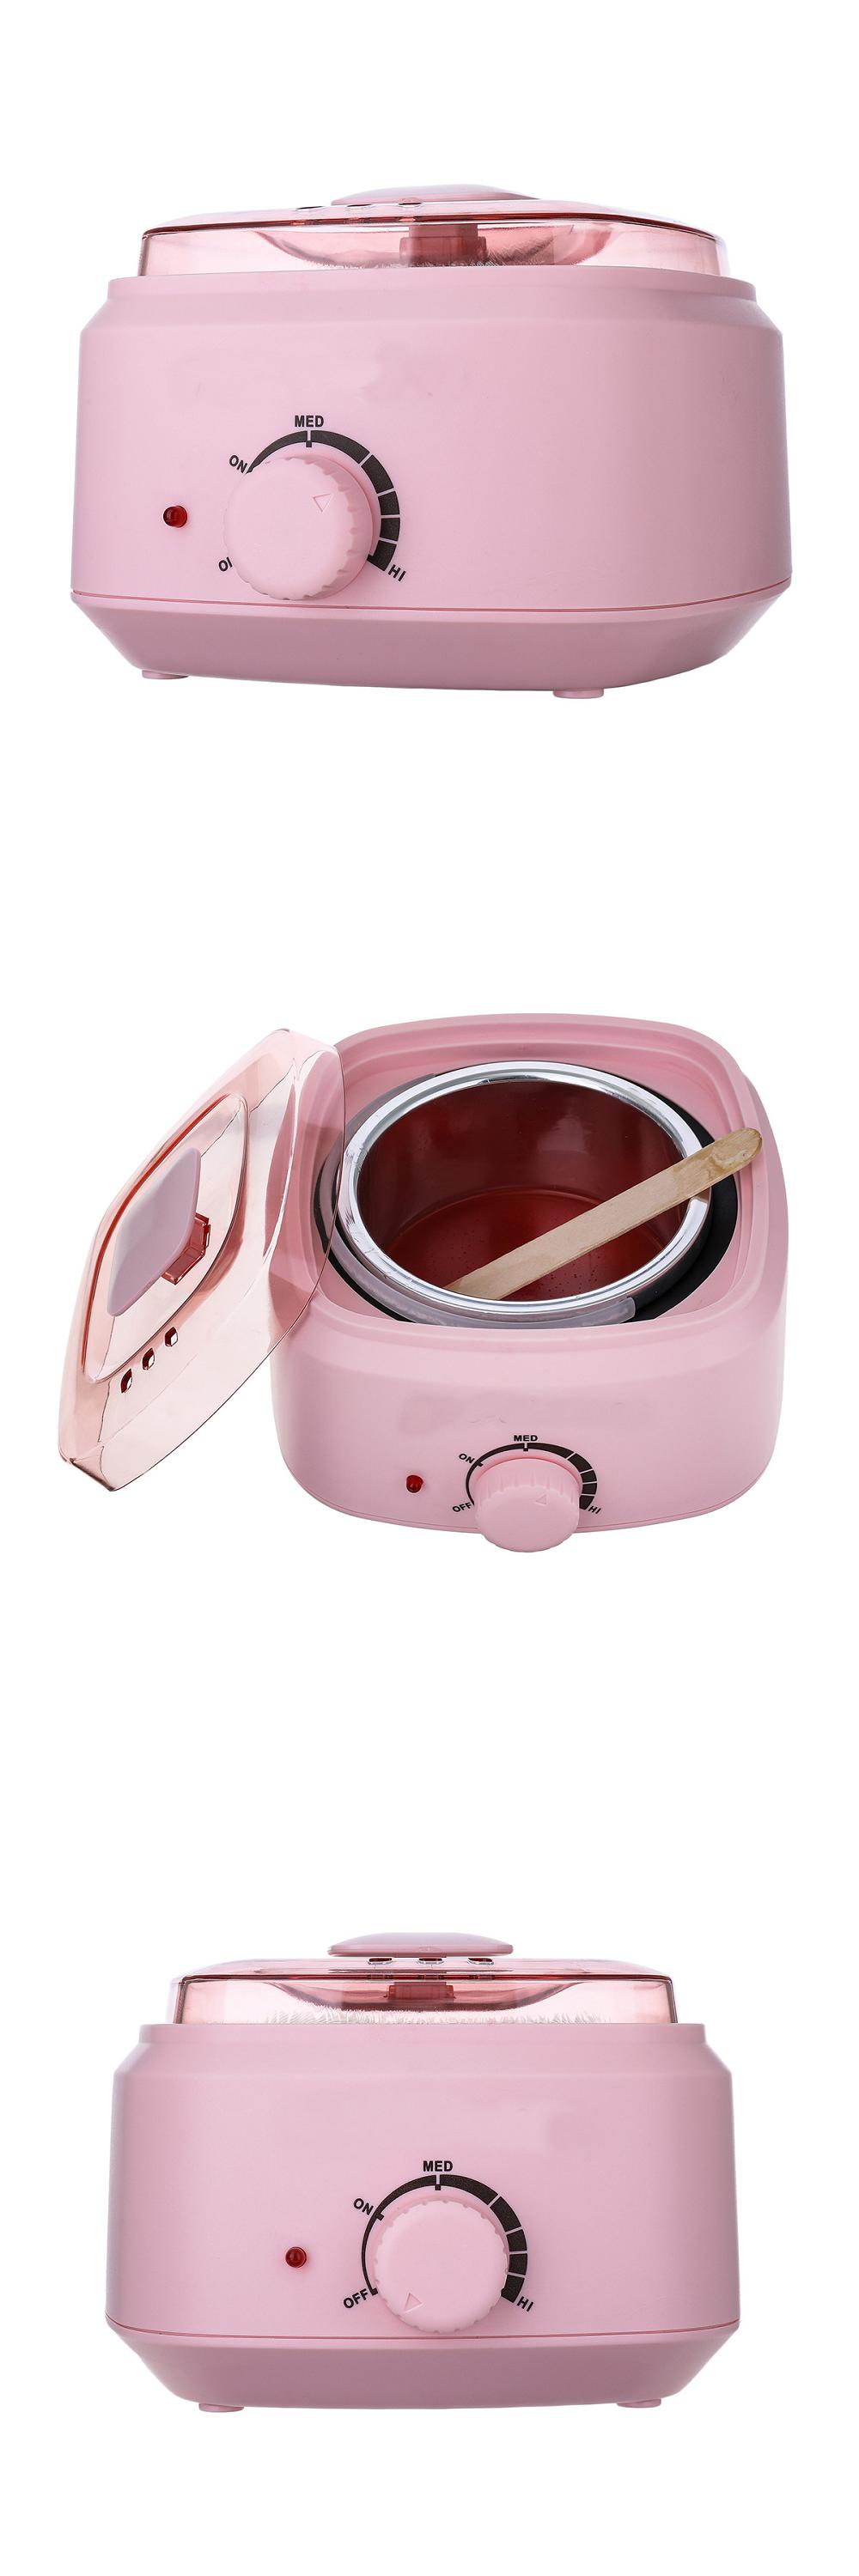 YFM-500cc-100W-Wax-Heater-Machine-for-Face-Body-See-through-Vented-Cover-Removable-Aluminum-Pot-360d-1898107-8